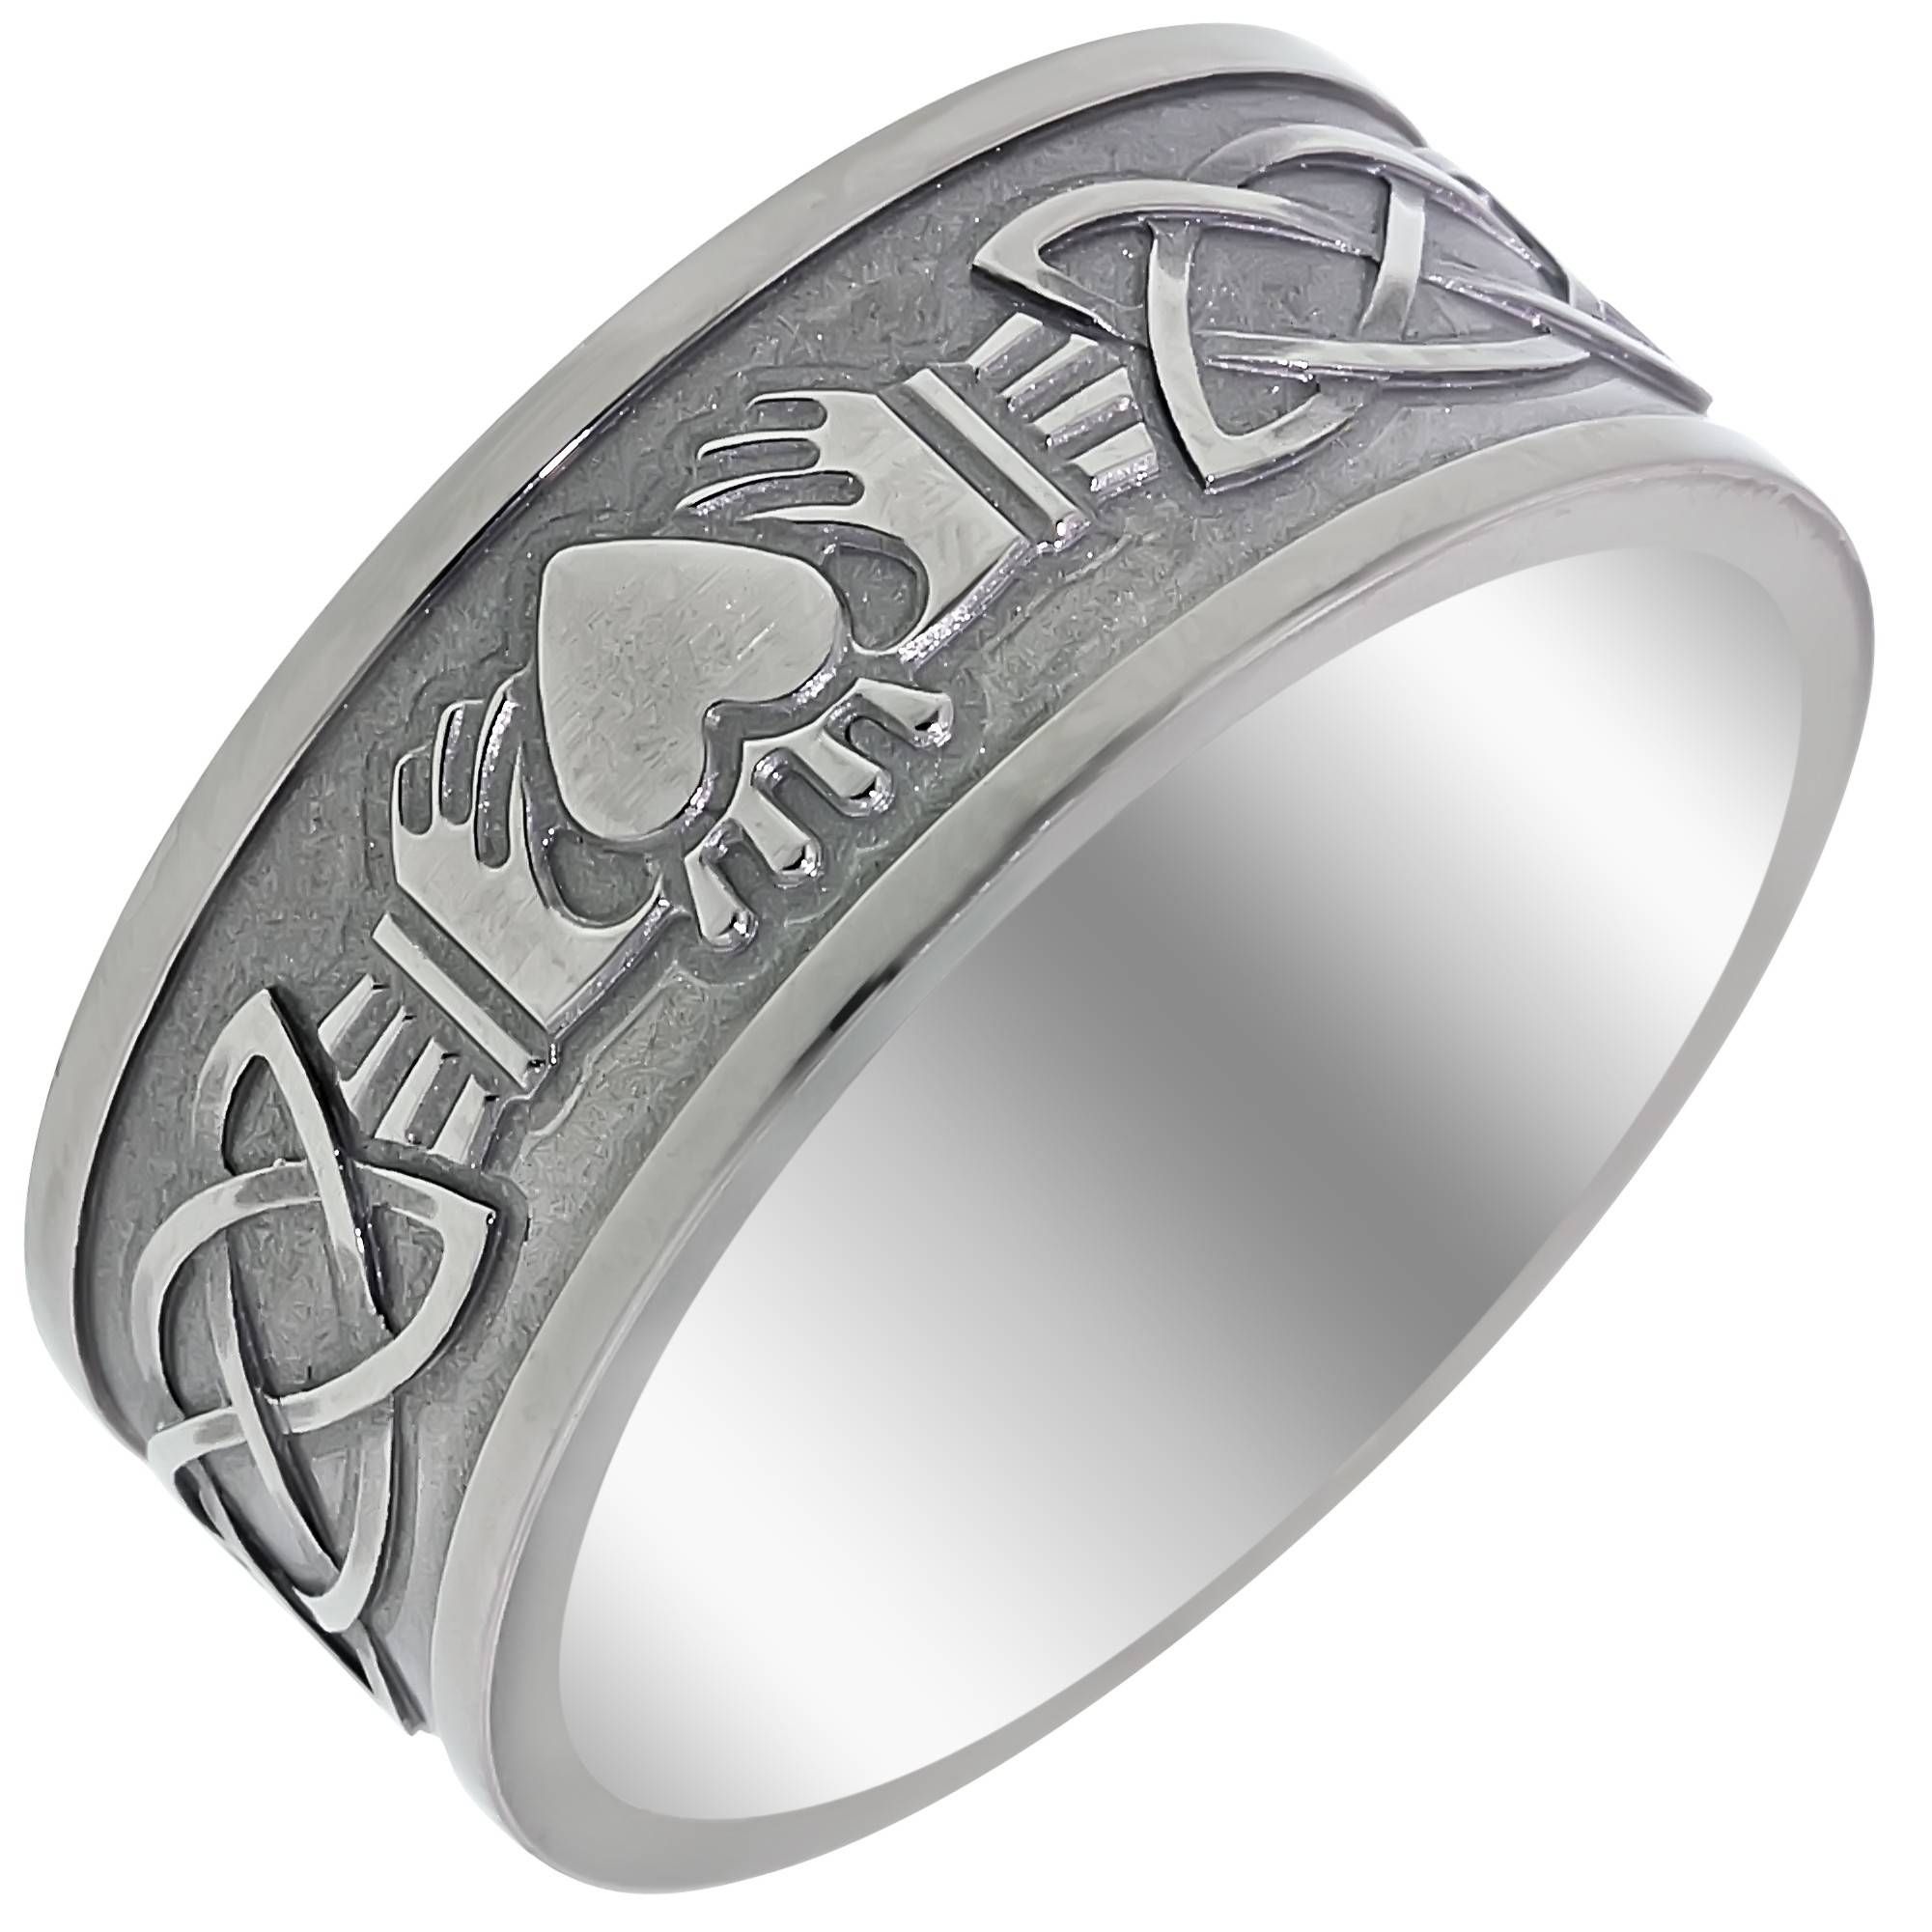 Mens Claddagh Celtic Wedding Band In Titanium (9mm) Throughout Mens Celtic Wedding Rings (View 4 of 15)